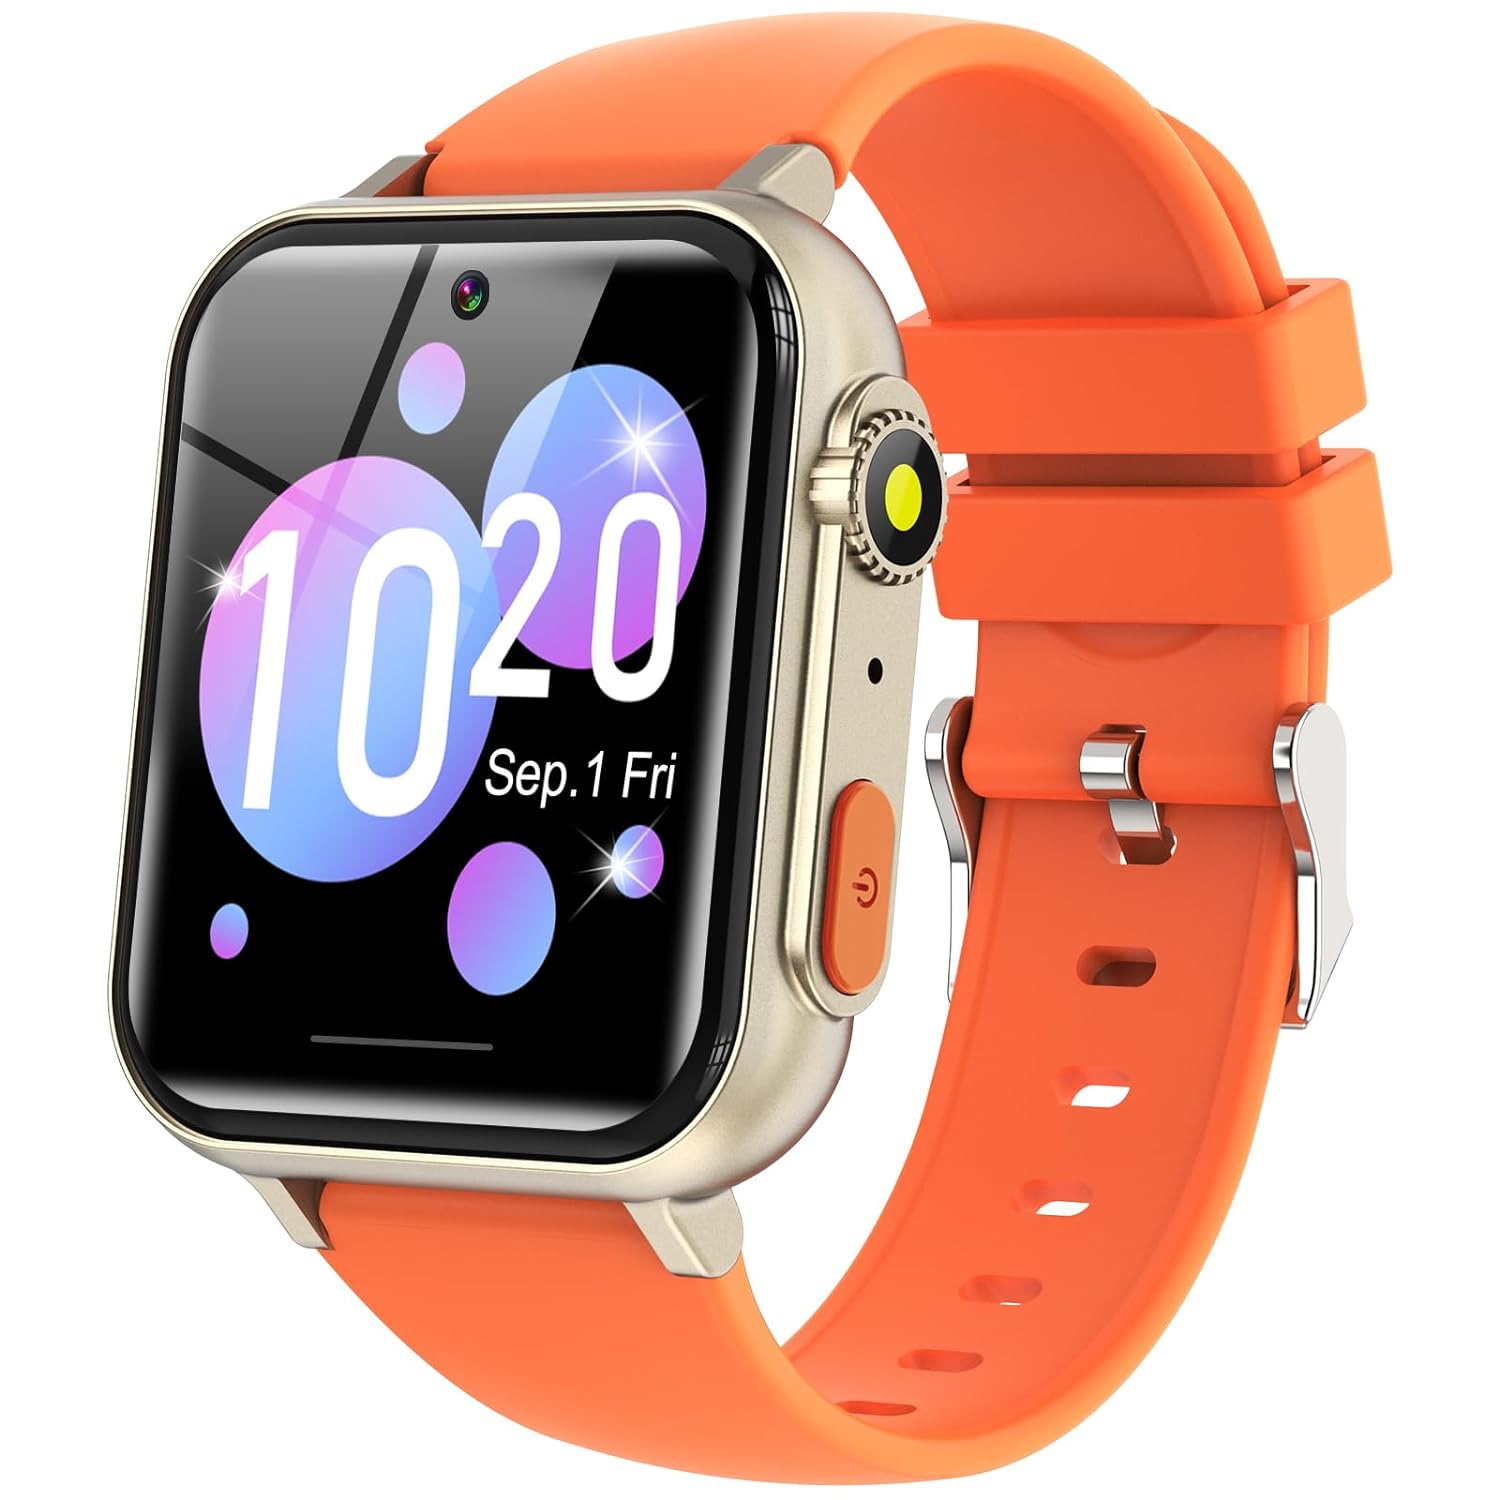 Smart Watch for Kids Watches - Kids Game Smart Watch Girls Boys Ages 4-12 Years with Music Player HD Touch Screen 23 Games Camera Alarm Video Pedometer Flashlight Kids Smartwatch Gift Toys (Orange)